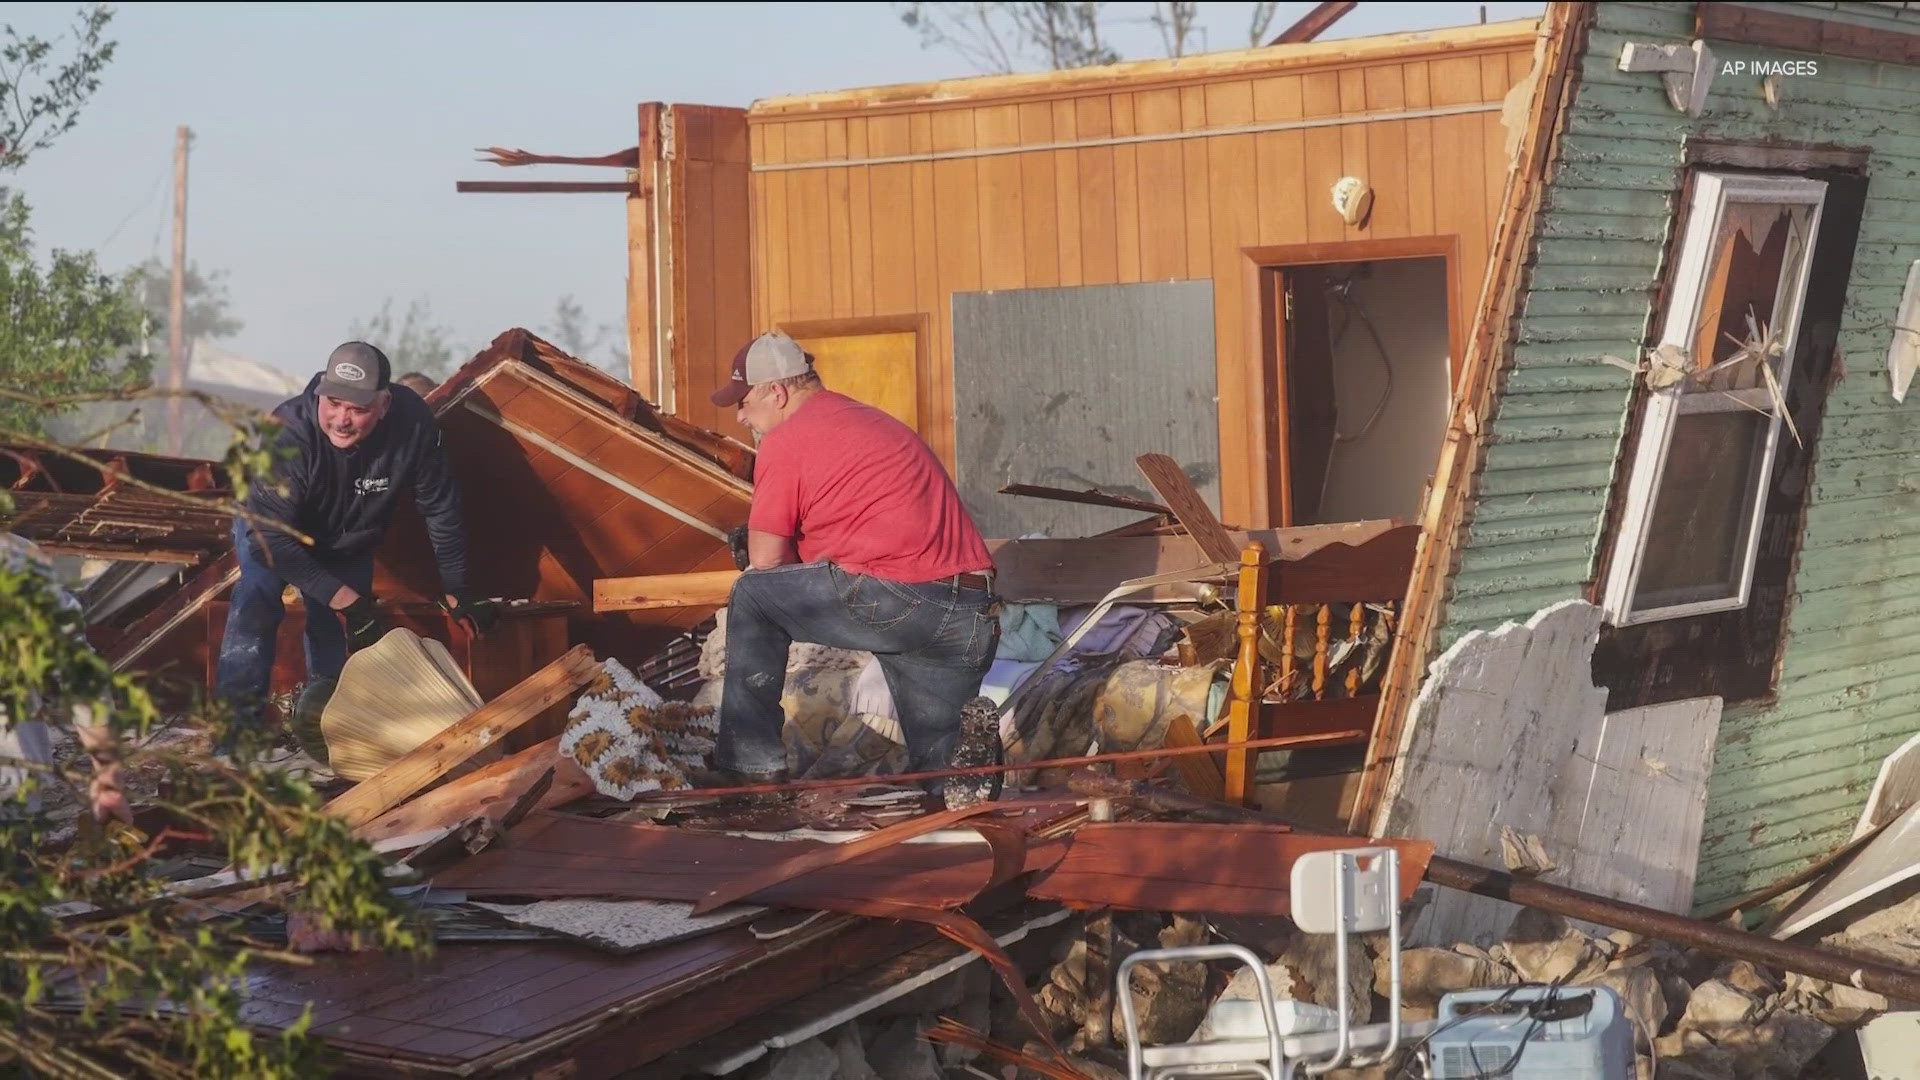 Communities in northeast Oklahoma are recovering after deadly severe weather that lasted Monday night into Tuesday morning.